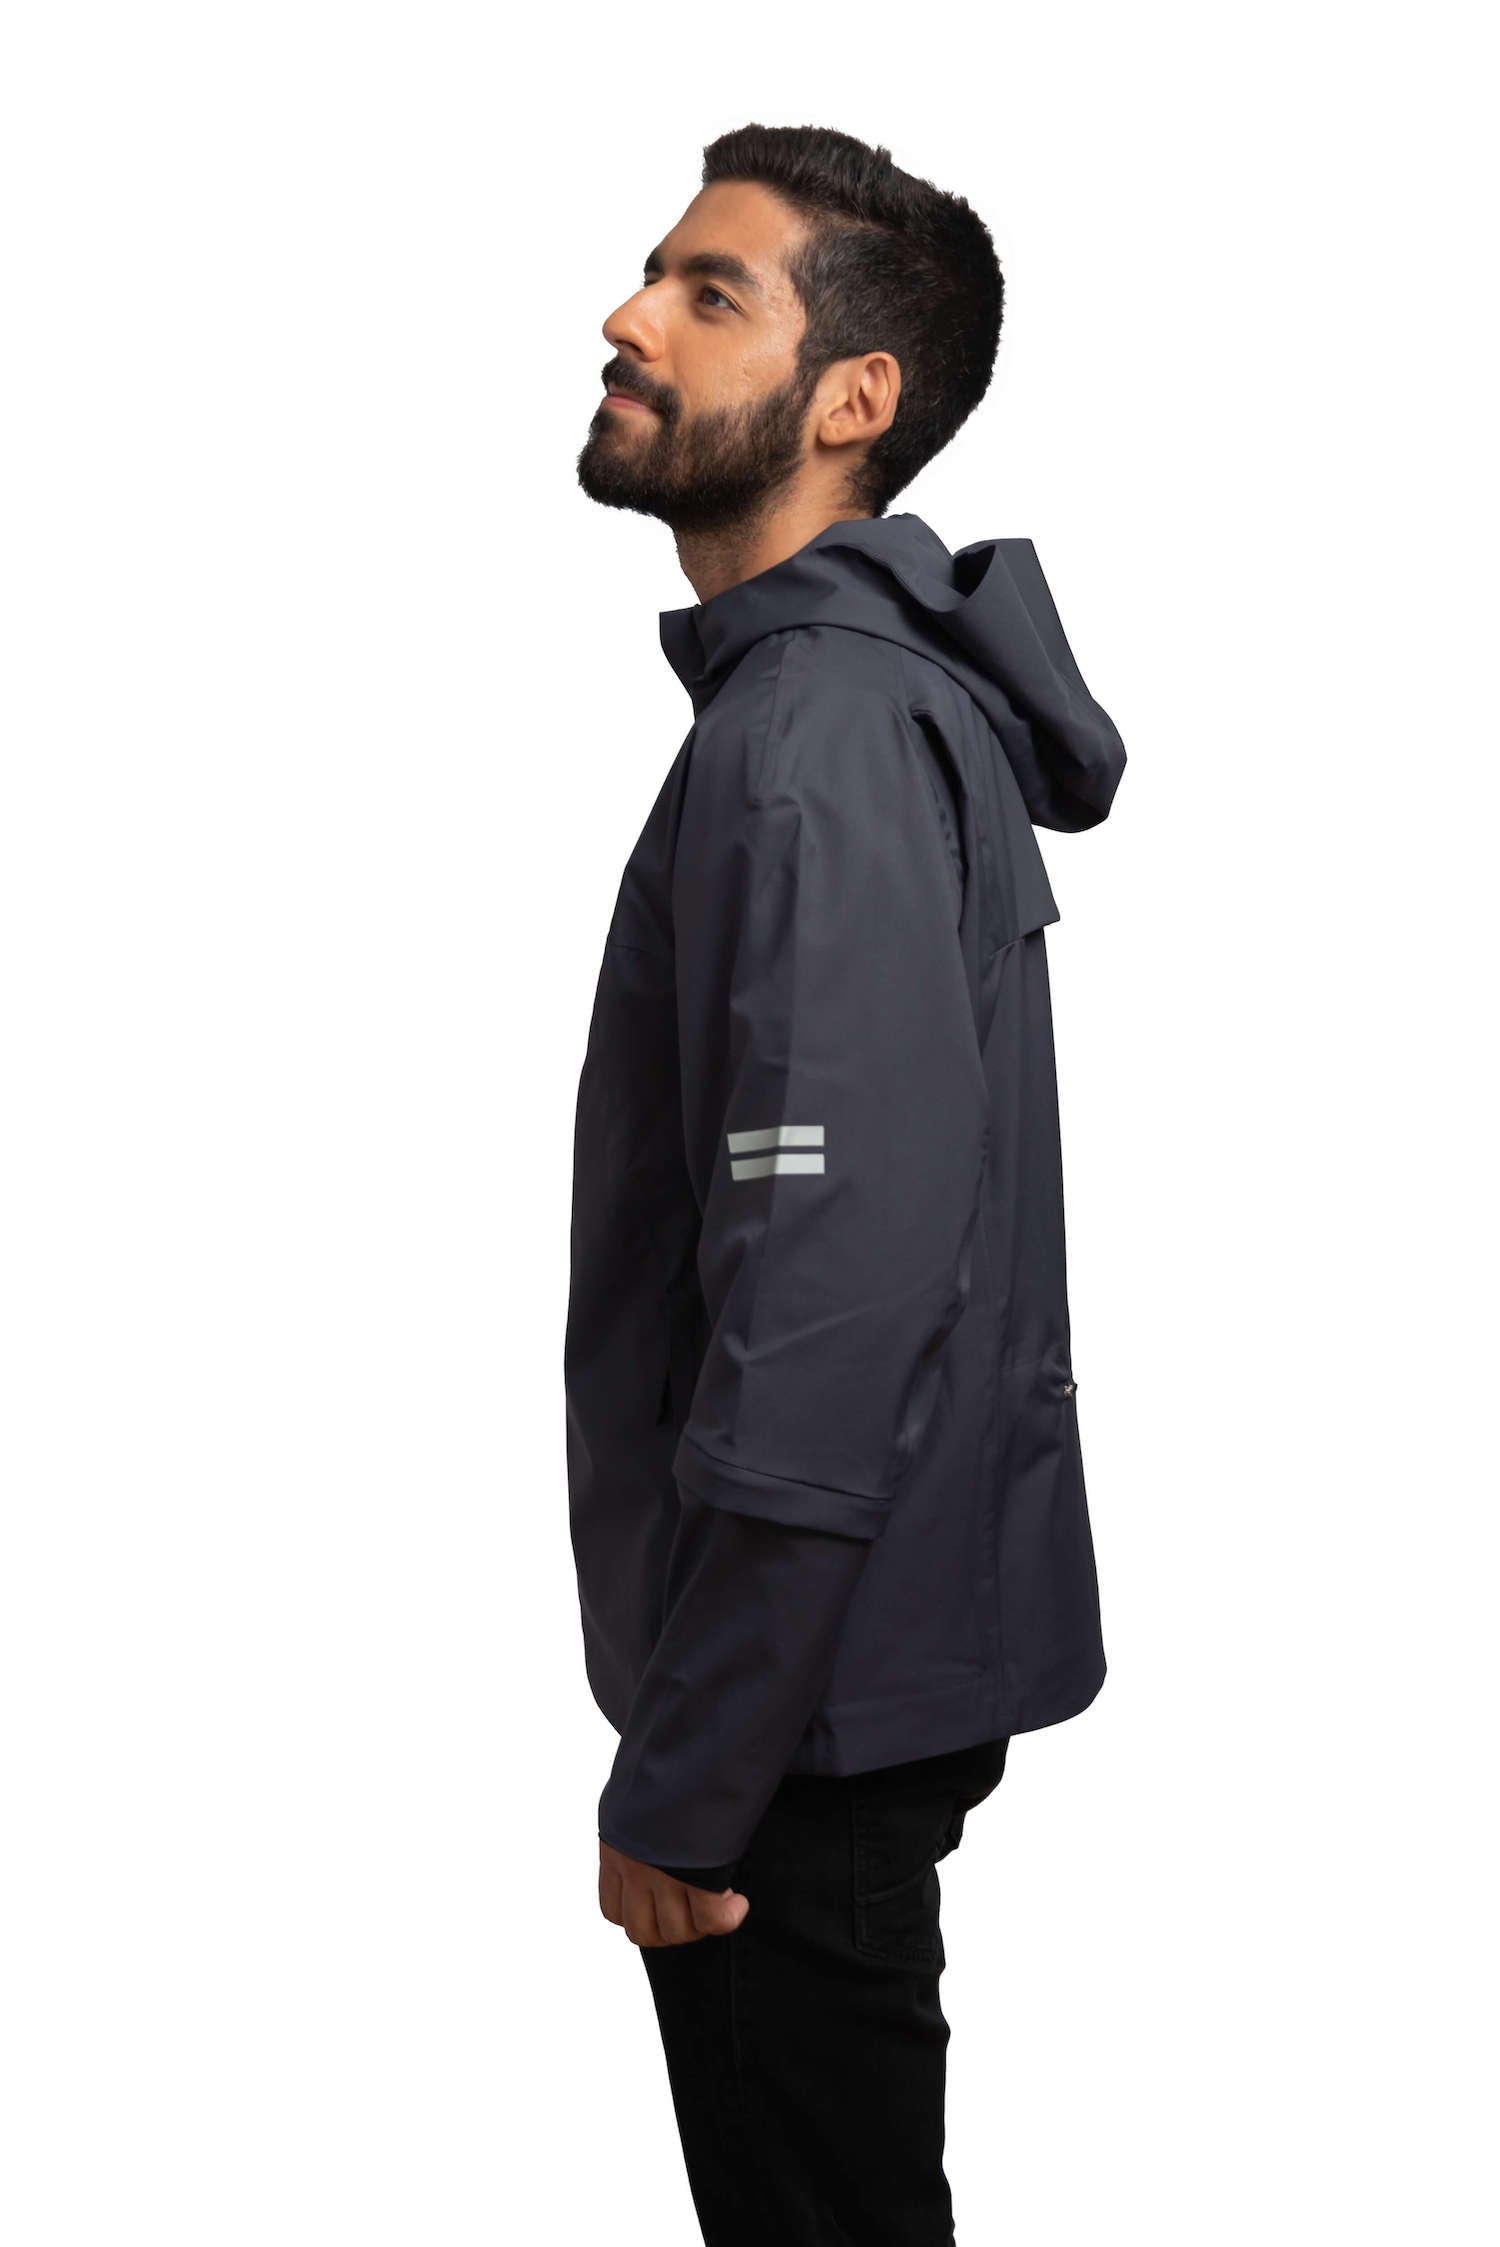 Vienna Designer Label MONTREET - Recycled Sportswear - Grey Cycling Jacket with Reflectors